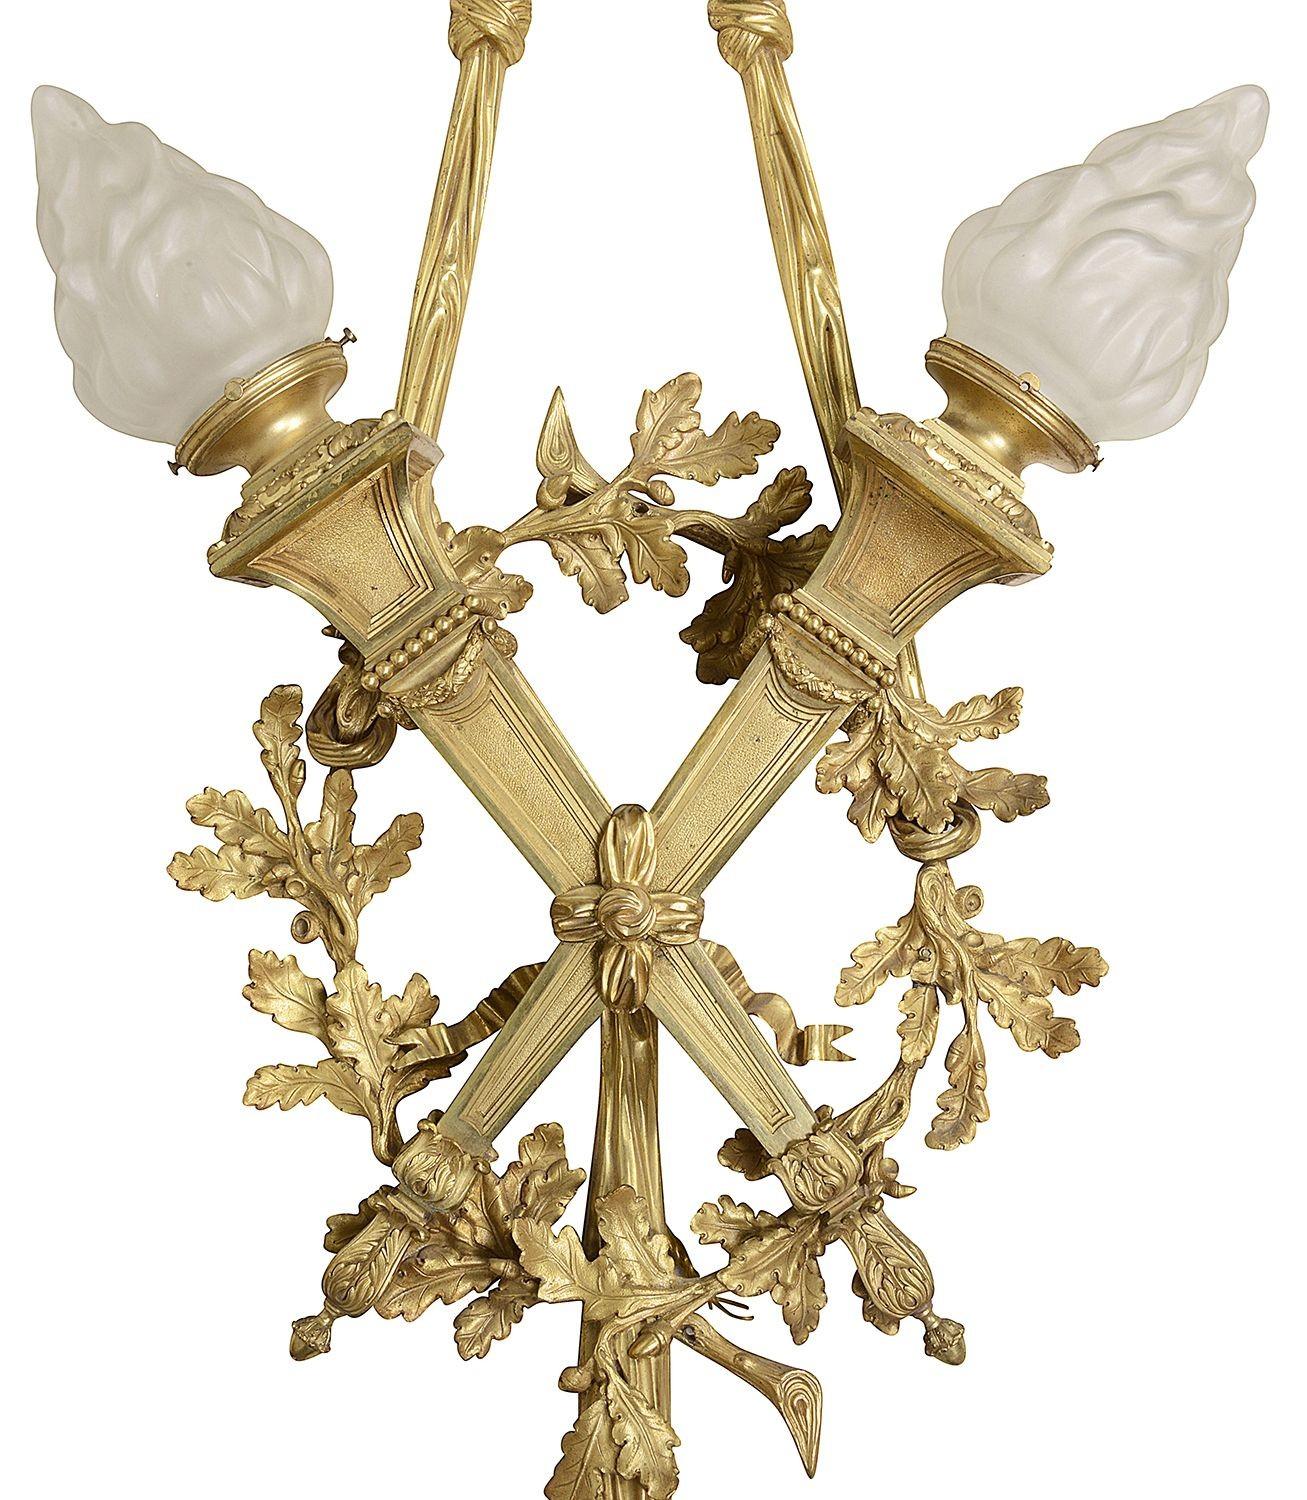 A large and impressive pair of classical Louis XVI style gilded ormolu wall lights, with flamed frosted glass shades on torches, held by a ribbon and bow with foliate wreaths to each.